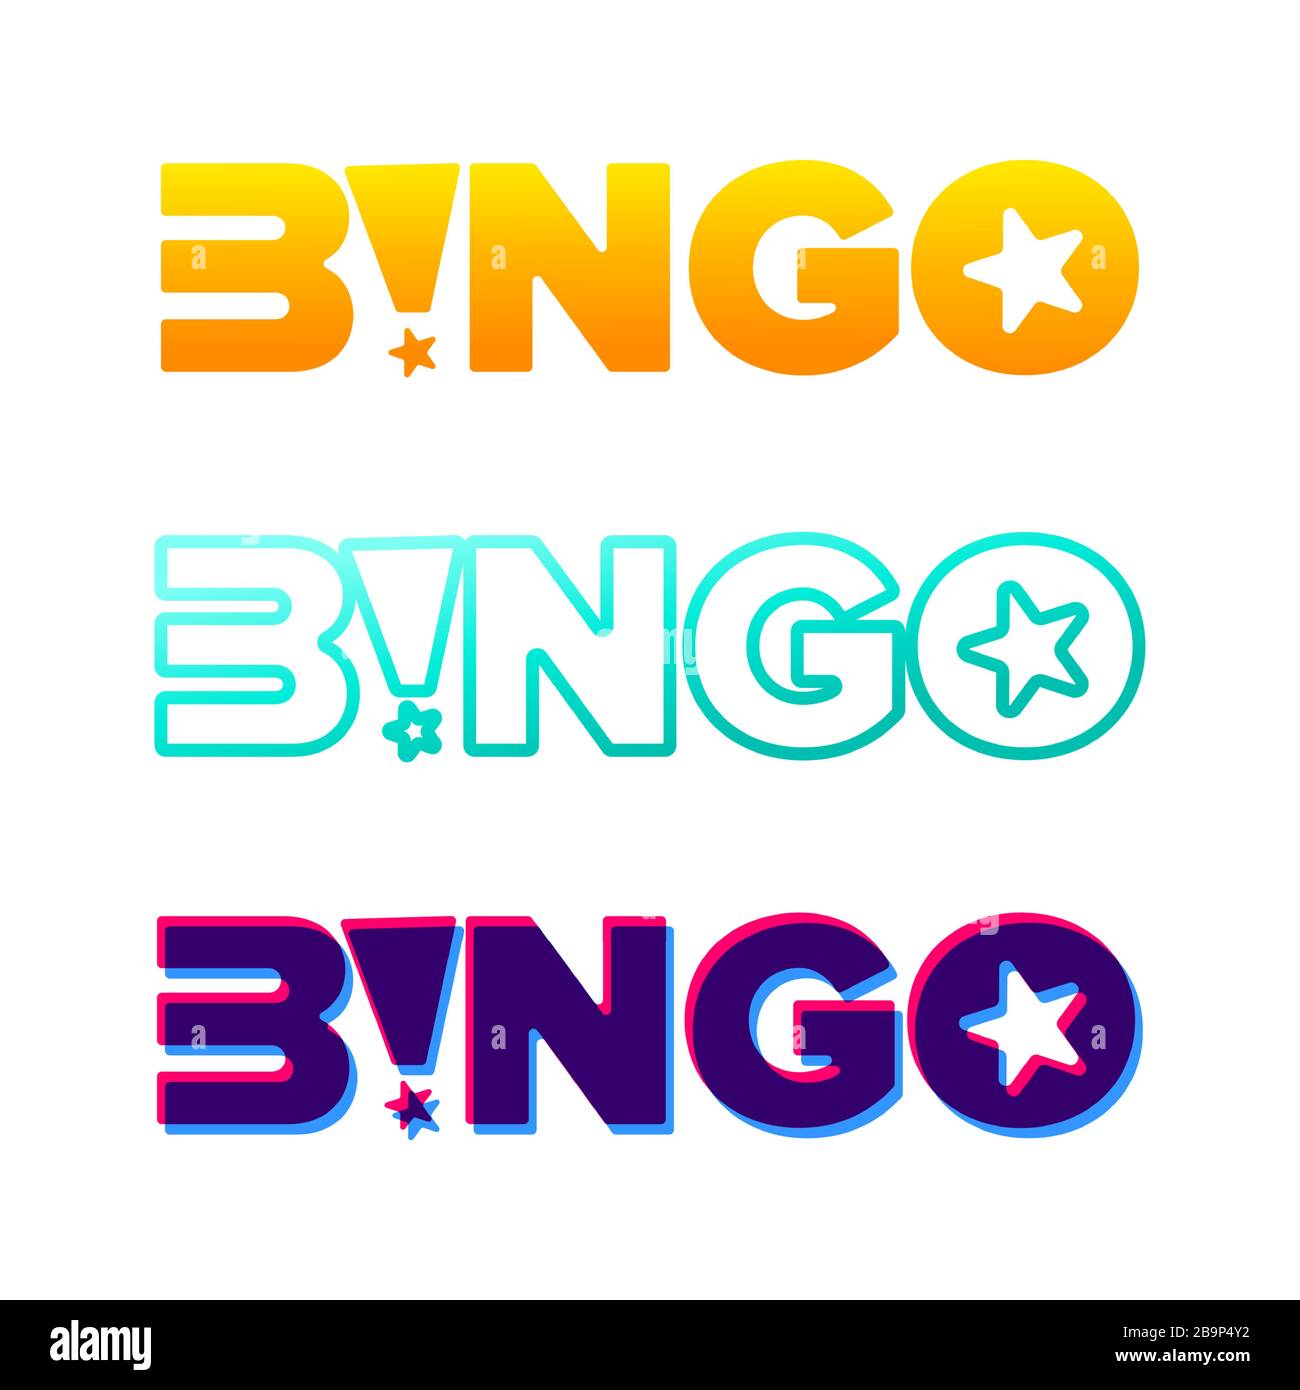 Bingo vector typography. Lottery retro glowing lettering. Game of chance and casino concept. Stock Vector